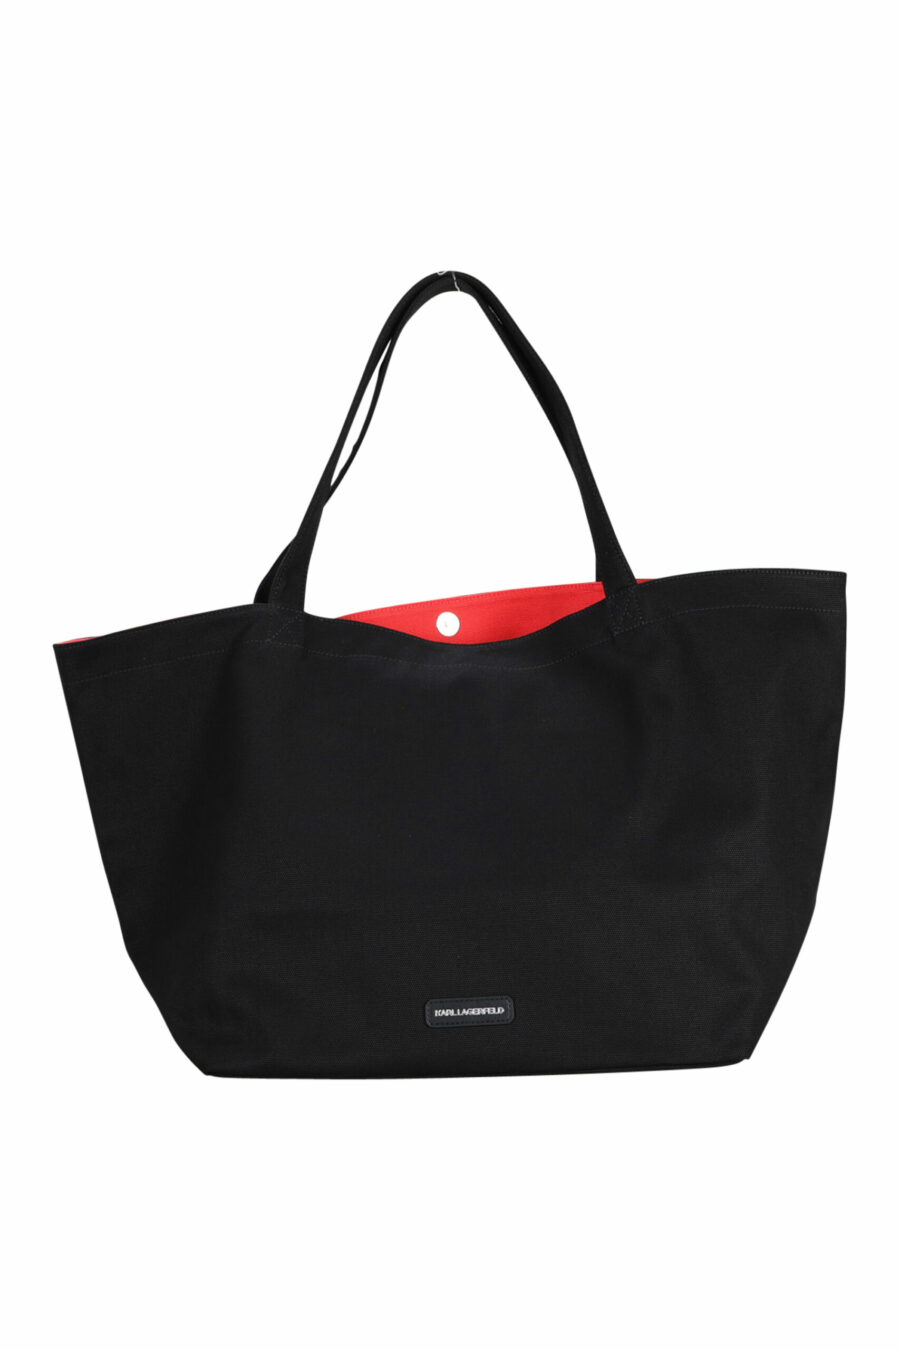 Black tote bag with maxilogo "rue st guillaume" - 8720092106603 2 scaled